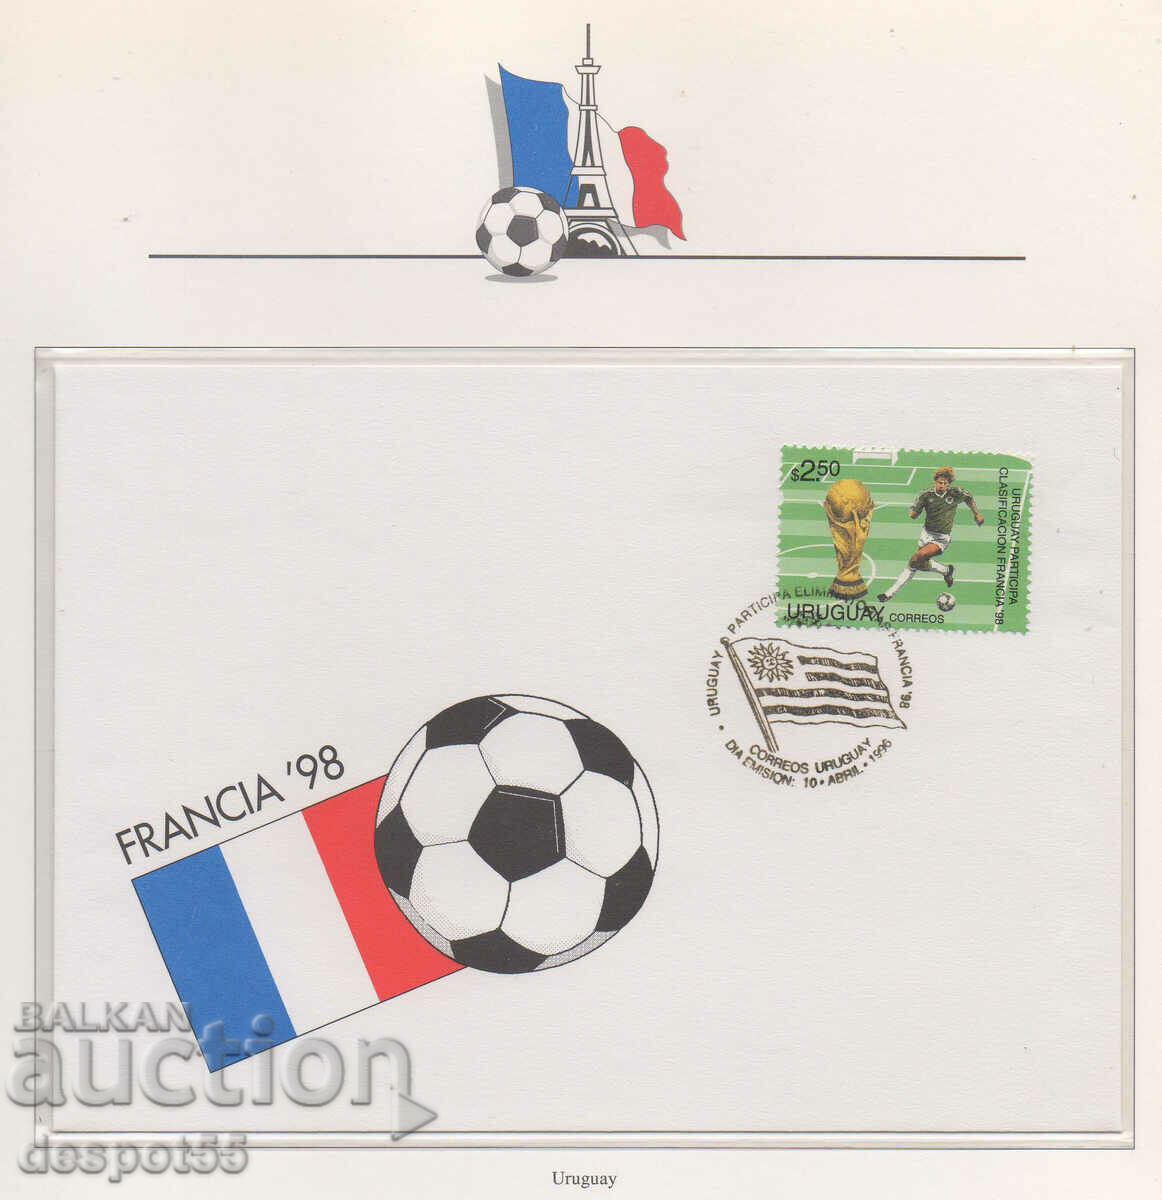 1996. Uruguay. World Cup in football - France '98. An envelope.